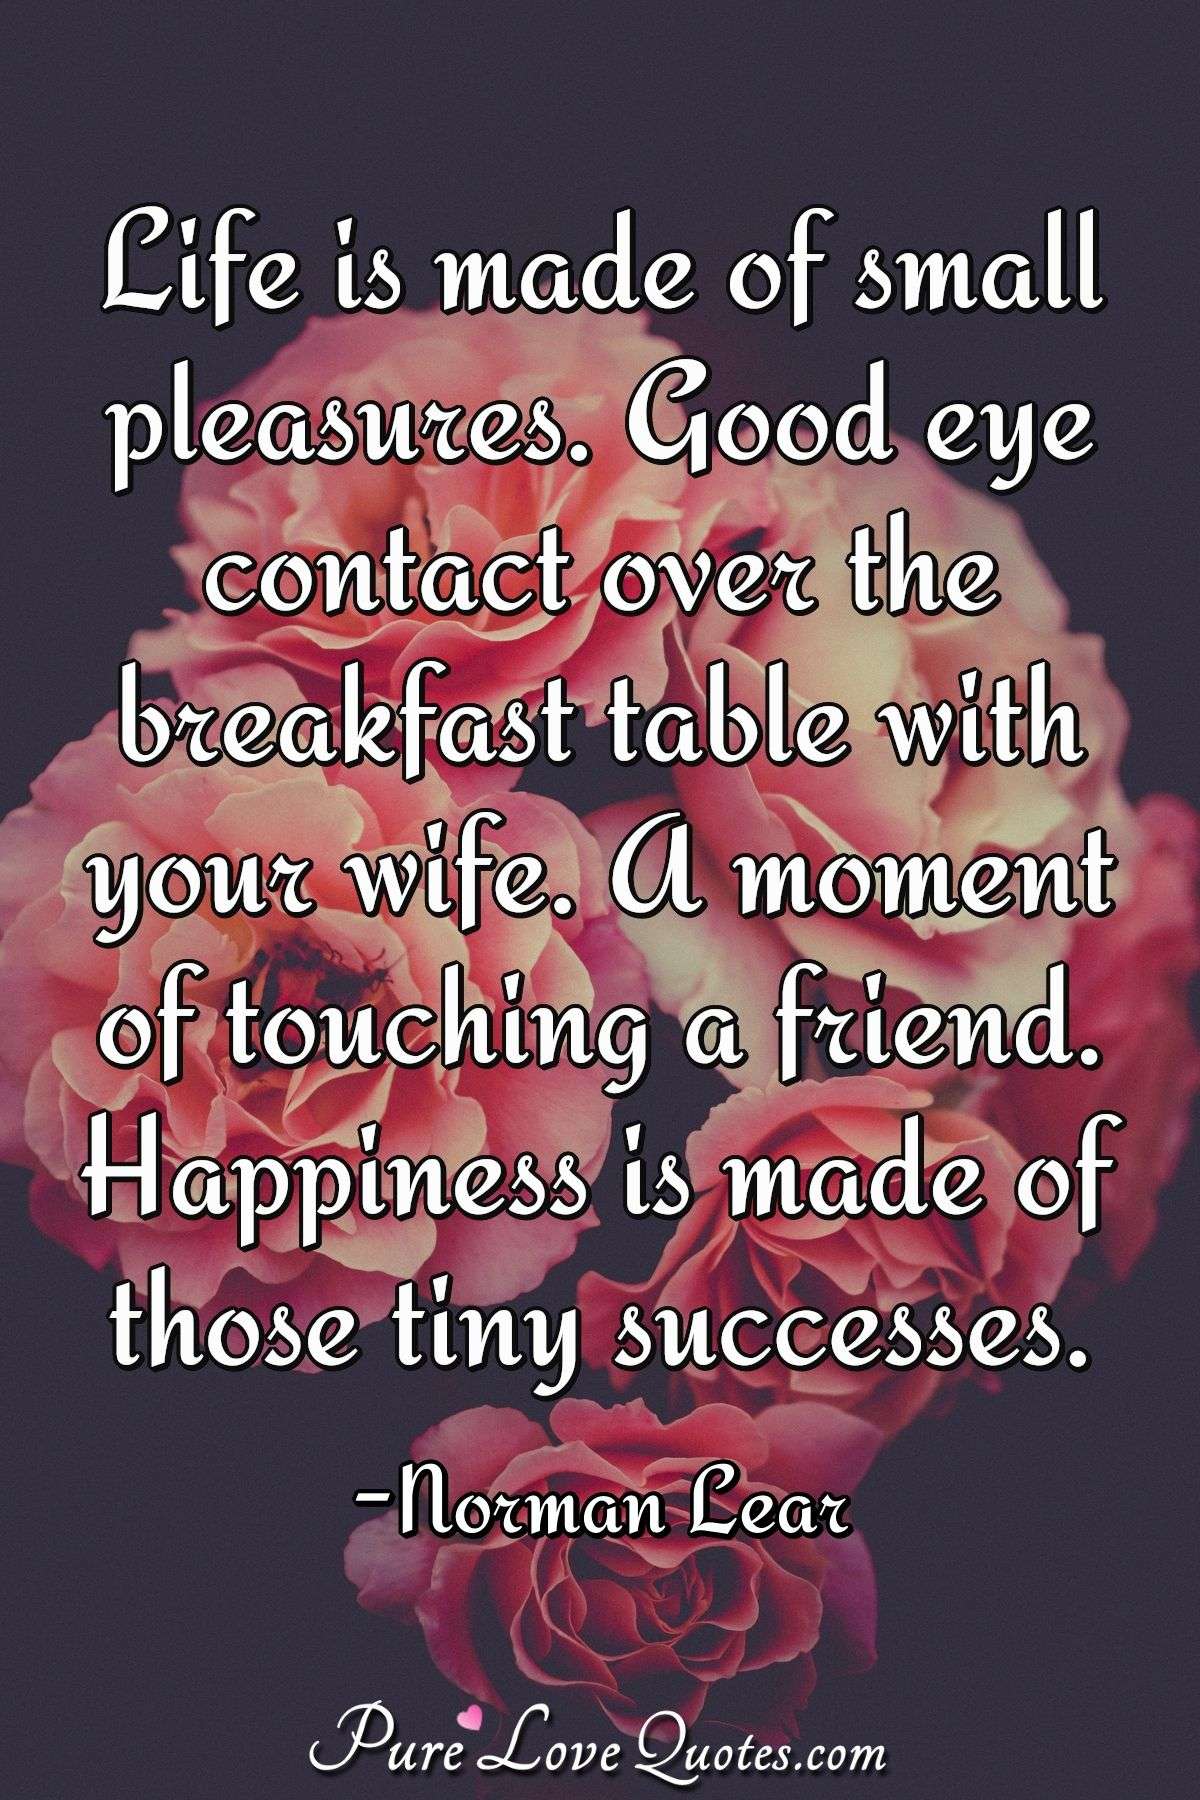 Life is made of small pleasures. Good eye contact over the breakfast table with your wife. A moment of touching a friend. Happiness is made of those tiny successes. - Norman Lear